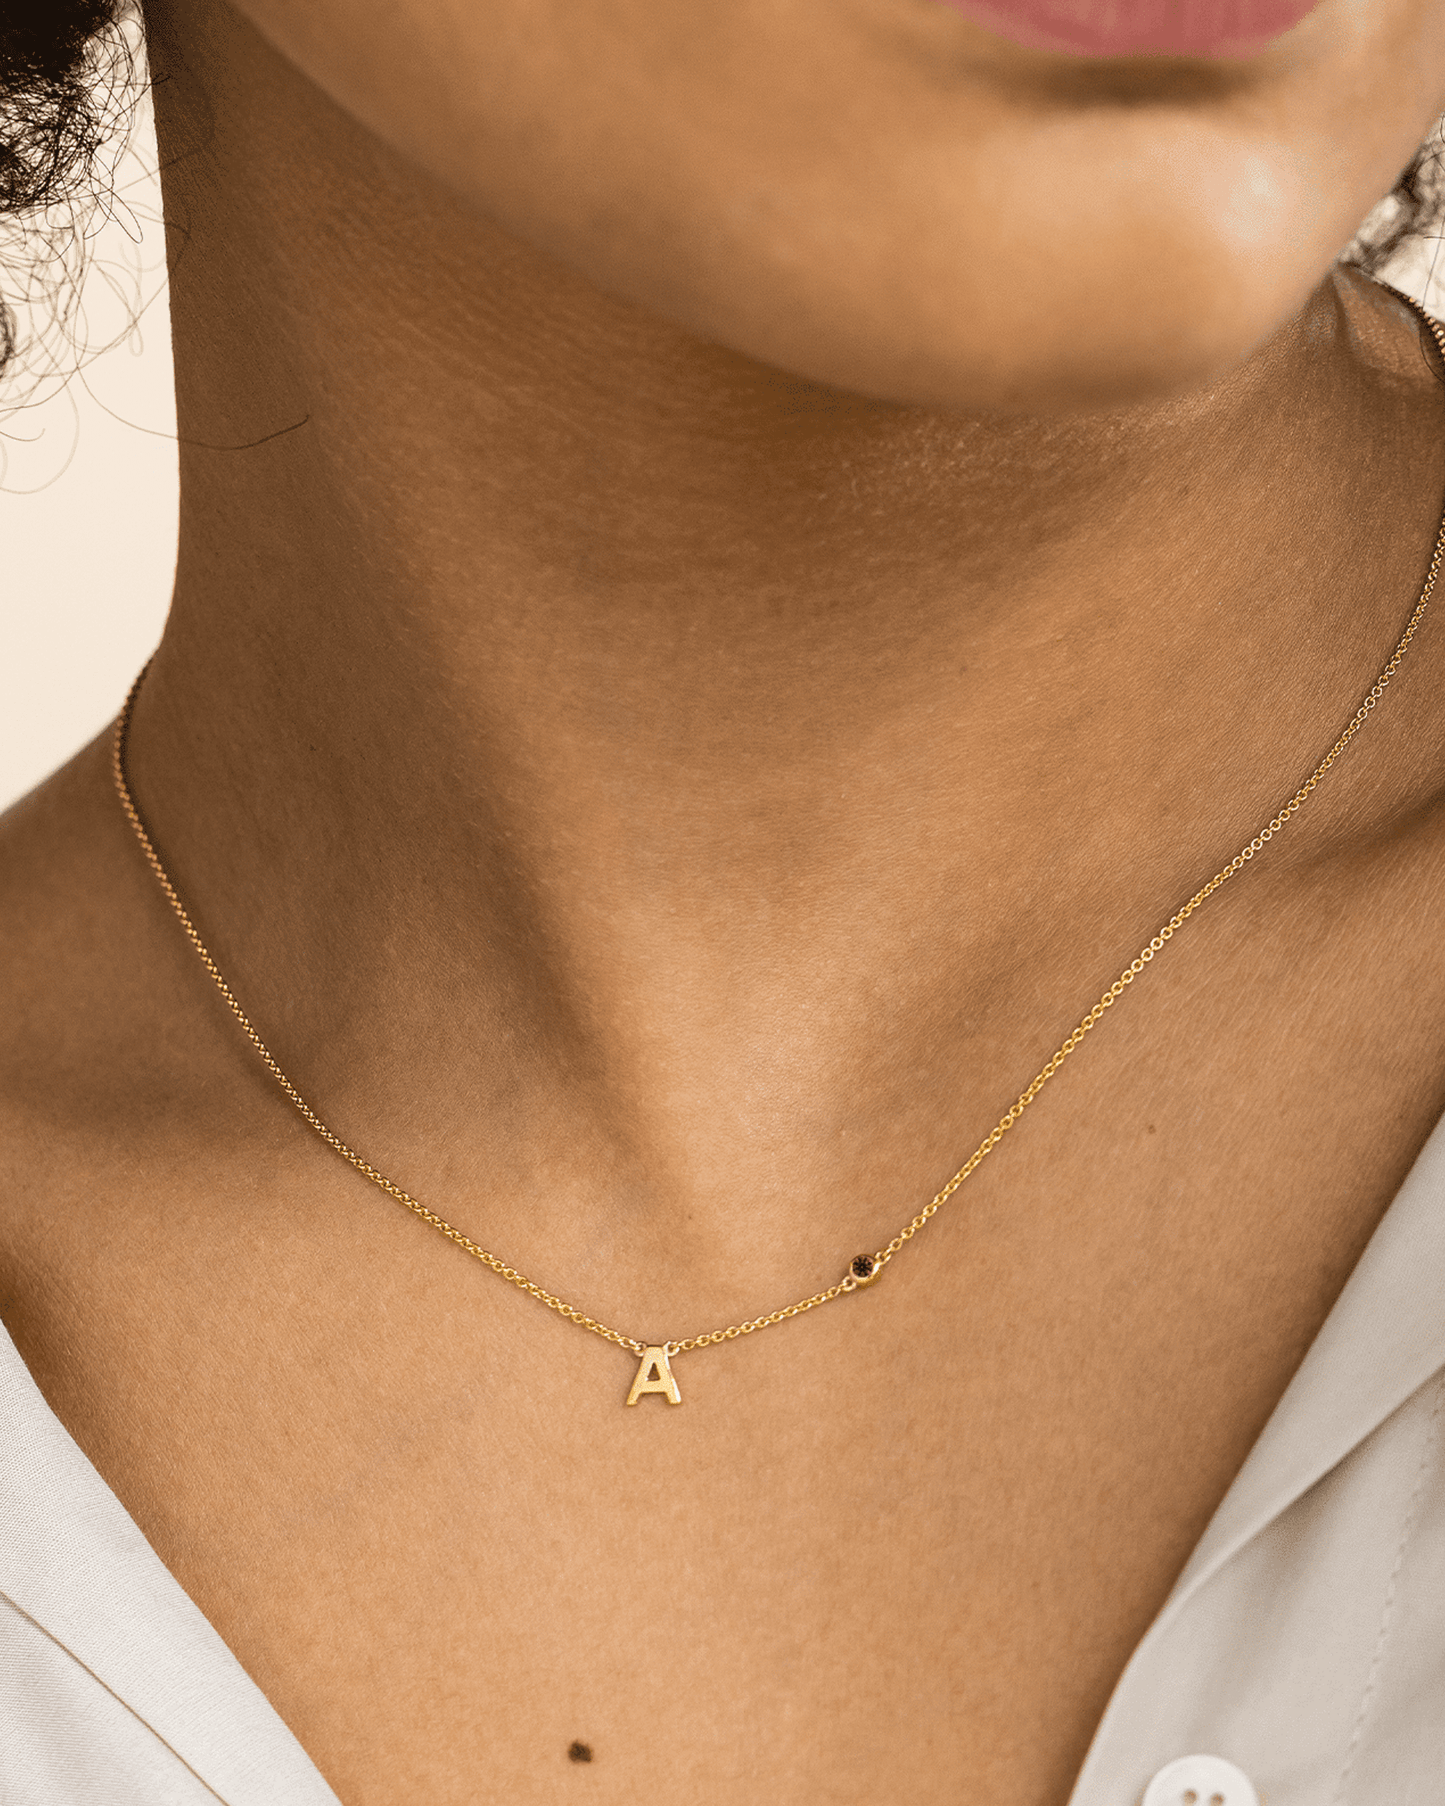 Initial Birthstone Necklace - 14K Rose Gold Necklaces magal-dev 